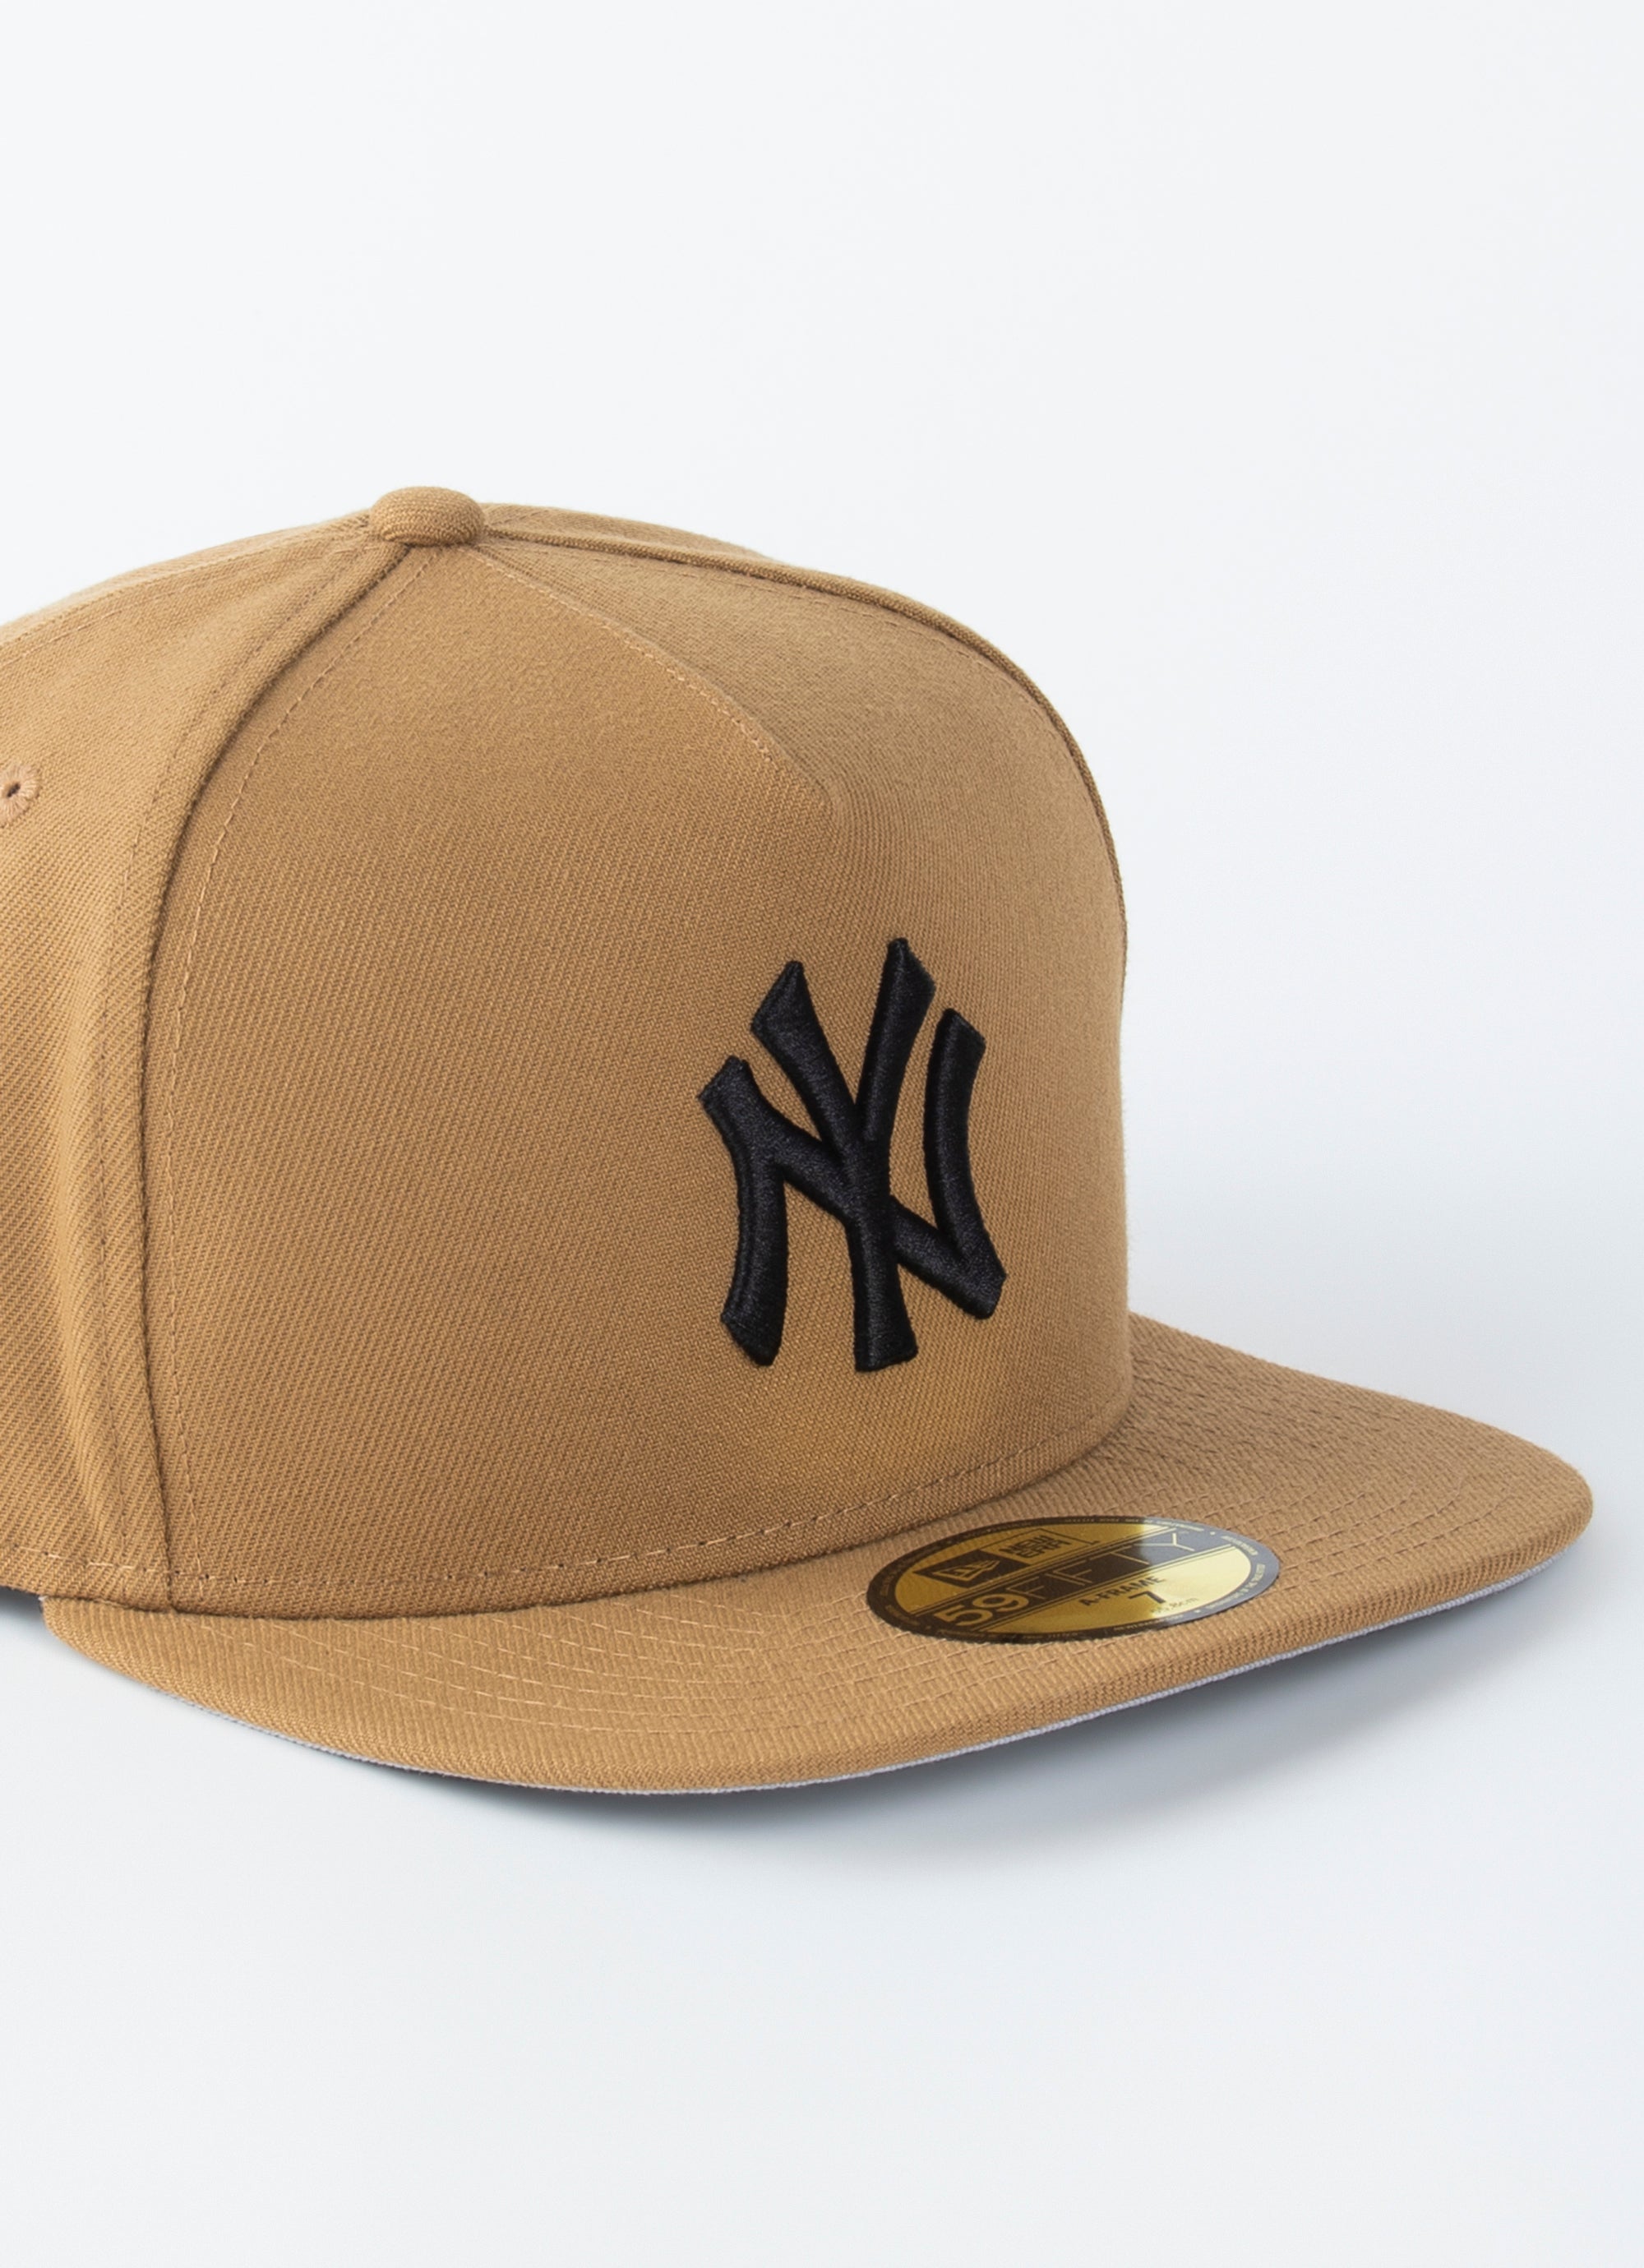 Men's New Era Tan New York Yankees Wheat 59FIFTY Fitted Hat